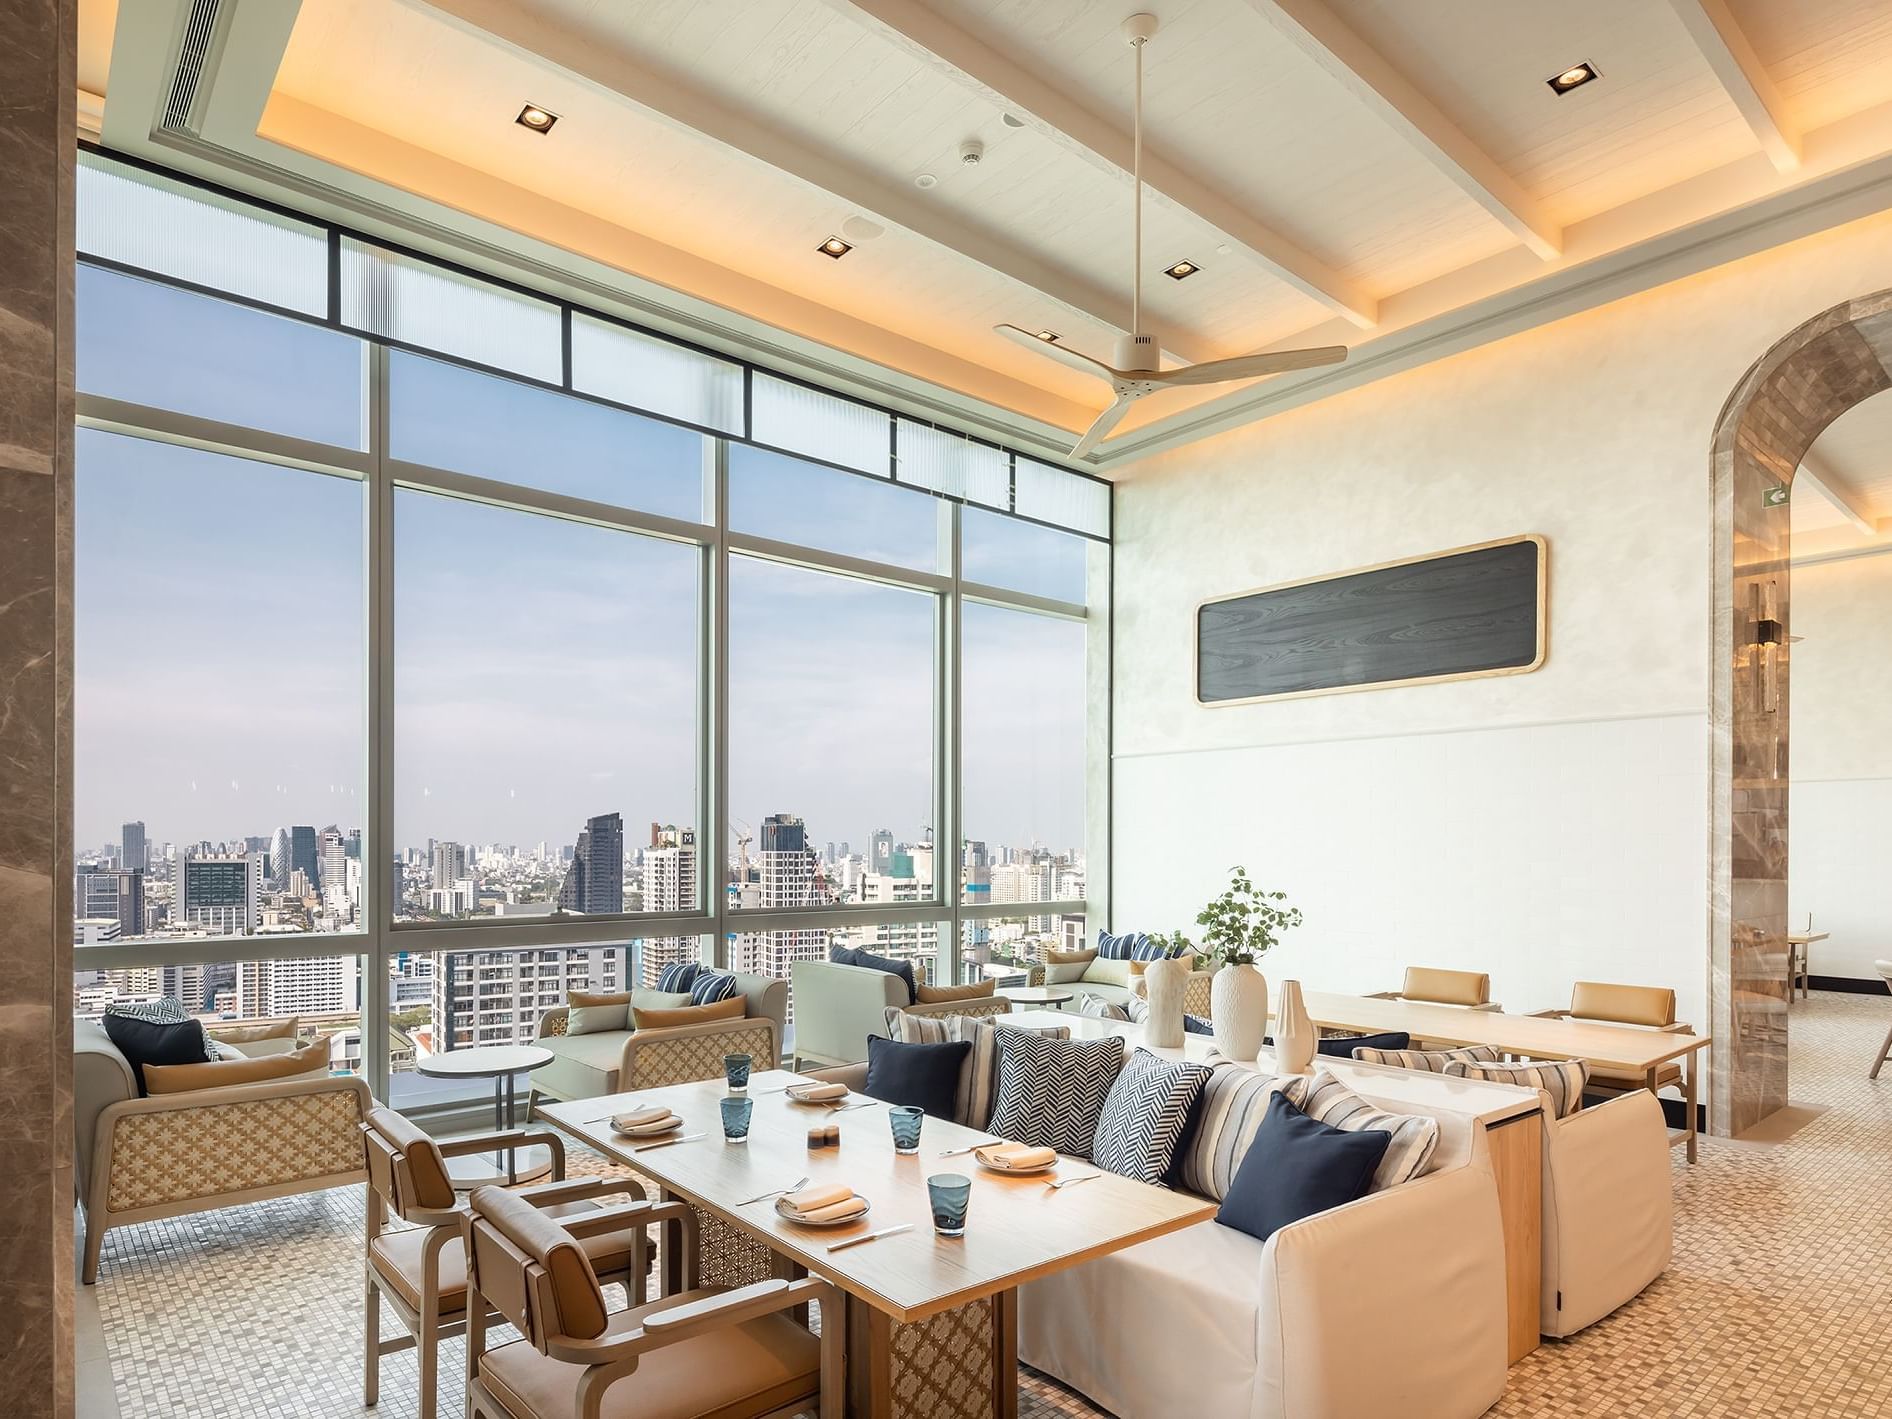 Restaurant-style dining set-up in Trattoria@22 with a city view at Eastin Grand Hotel Phayathai